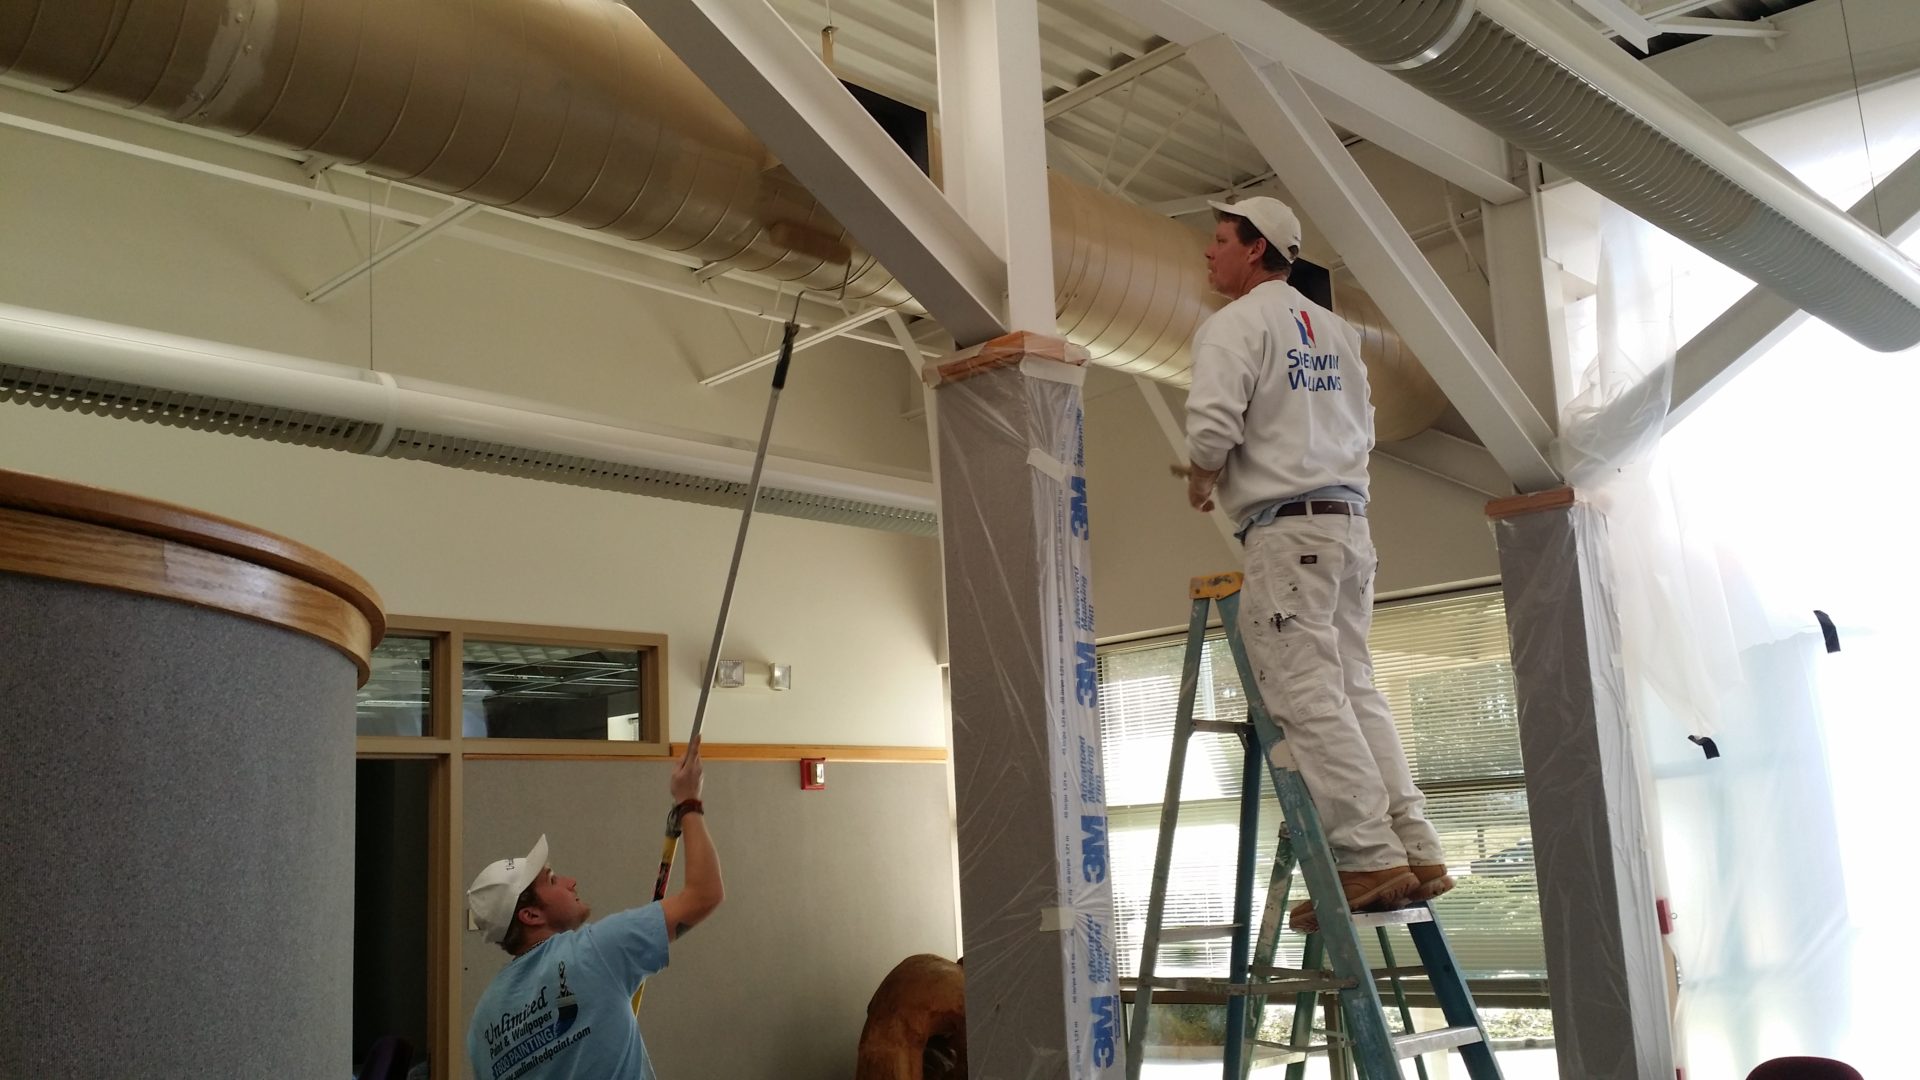 Raleigh Durham NC Commercial Painting Company